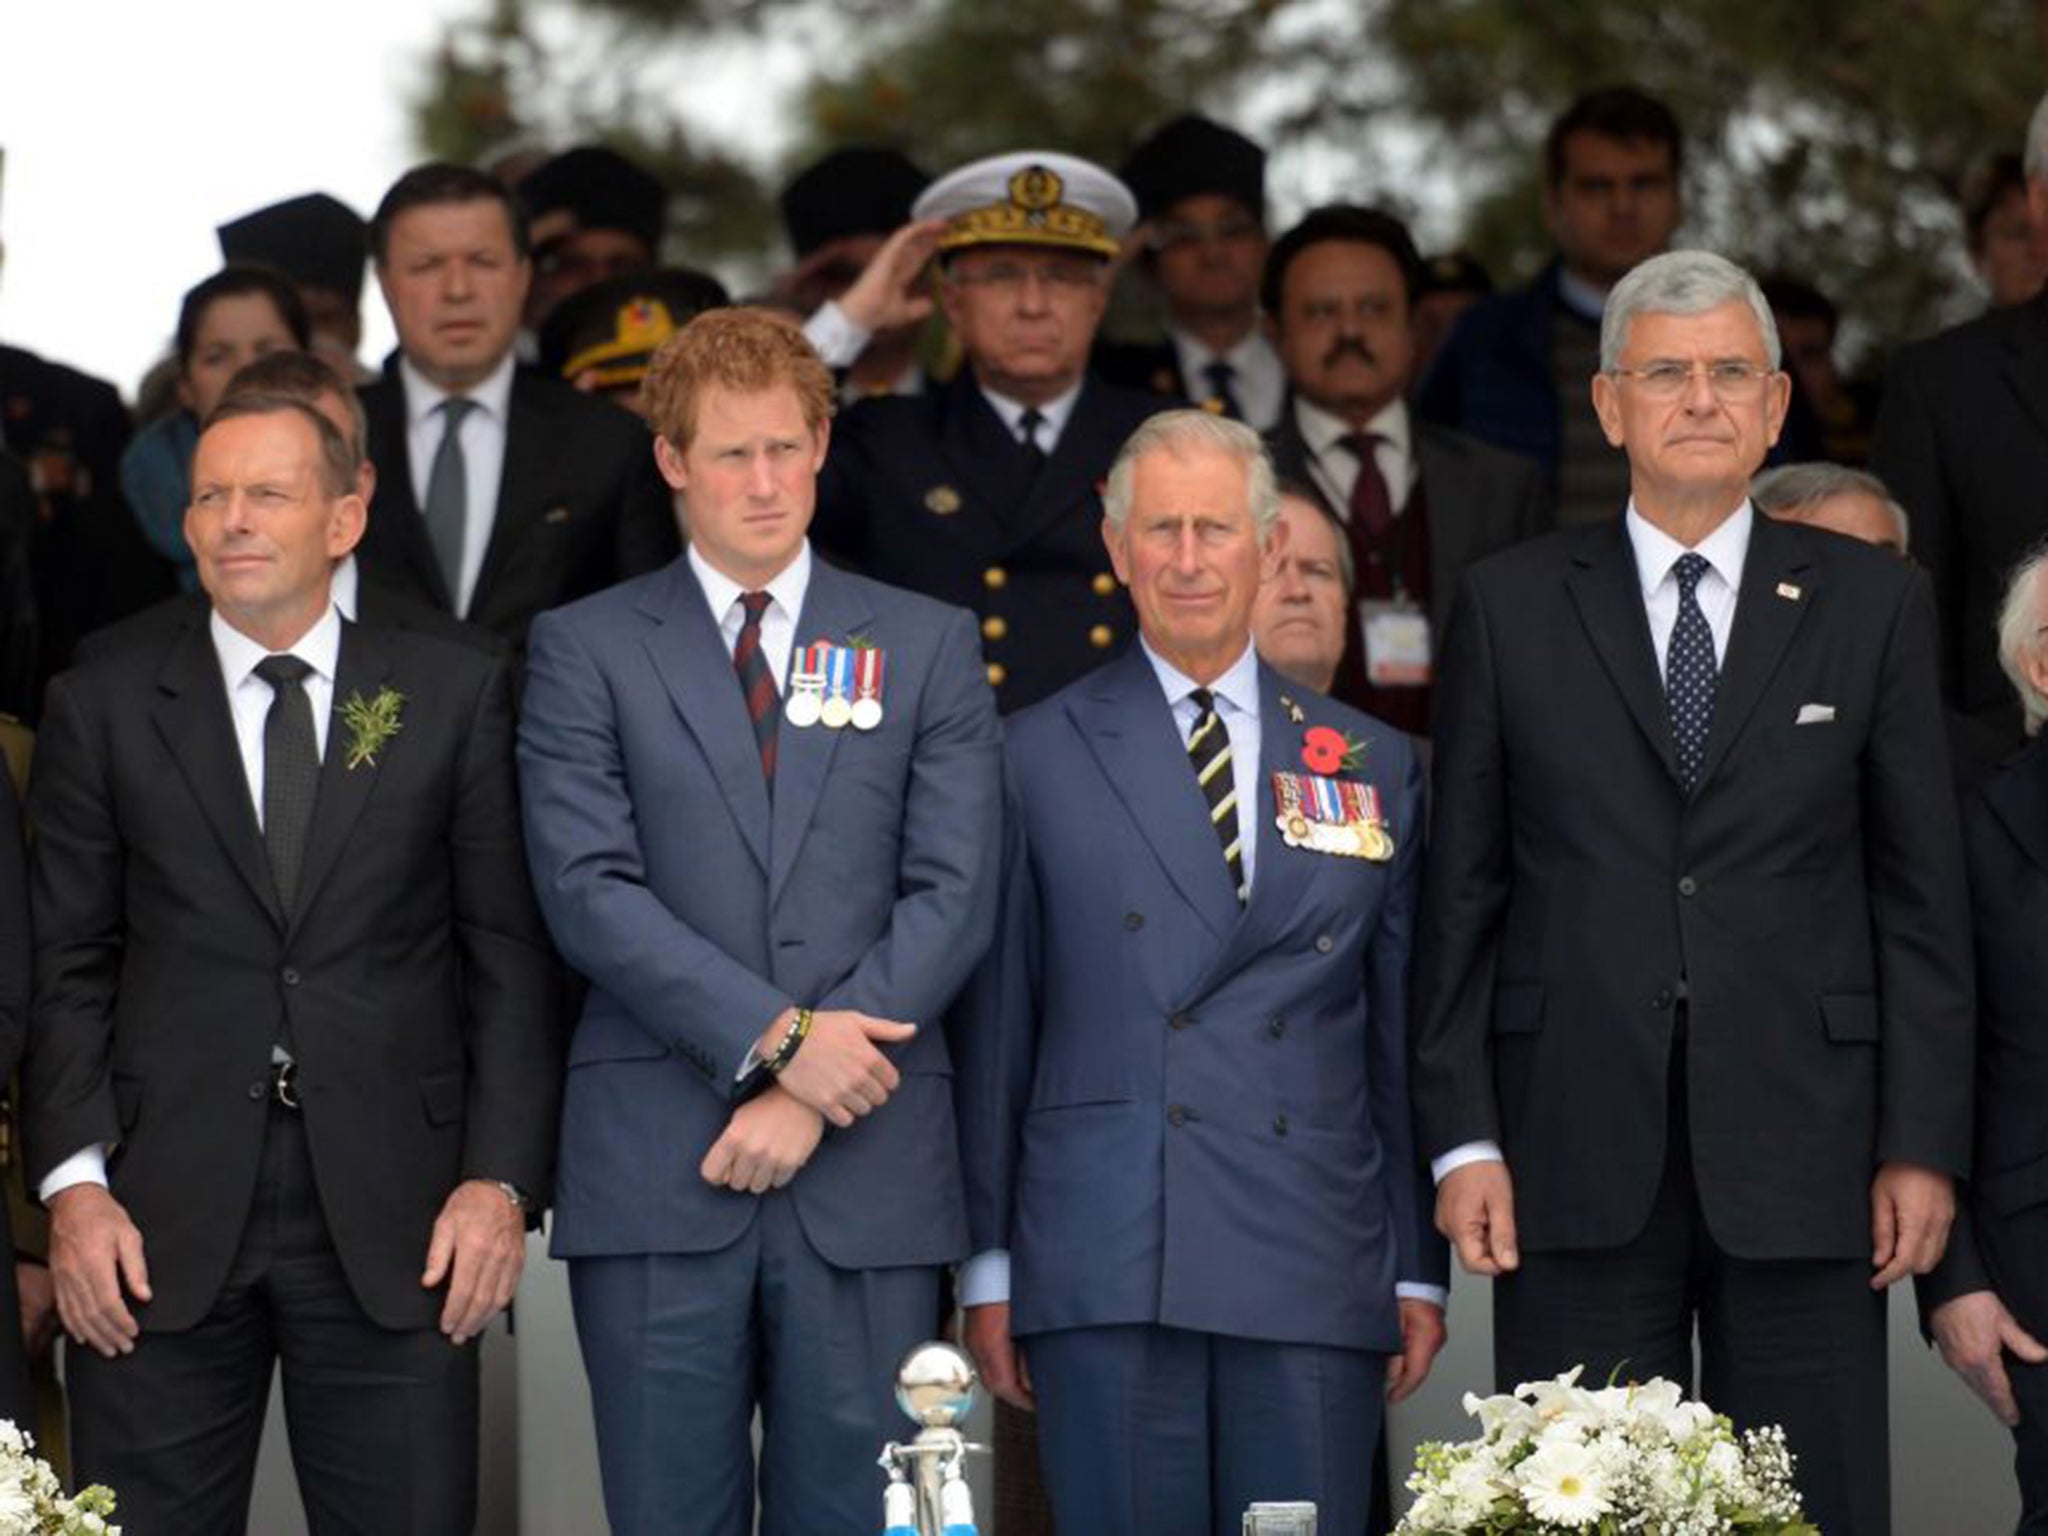 Prince Charles, Prince Harry and Australia's Prime Minister Tony Abbott, left, attended a commemorative ceremony marking the centenary of the Gallipoli campaign in Eceabat, Turkey